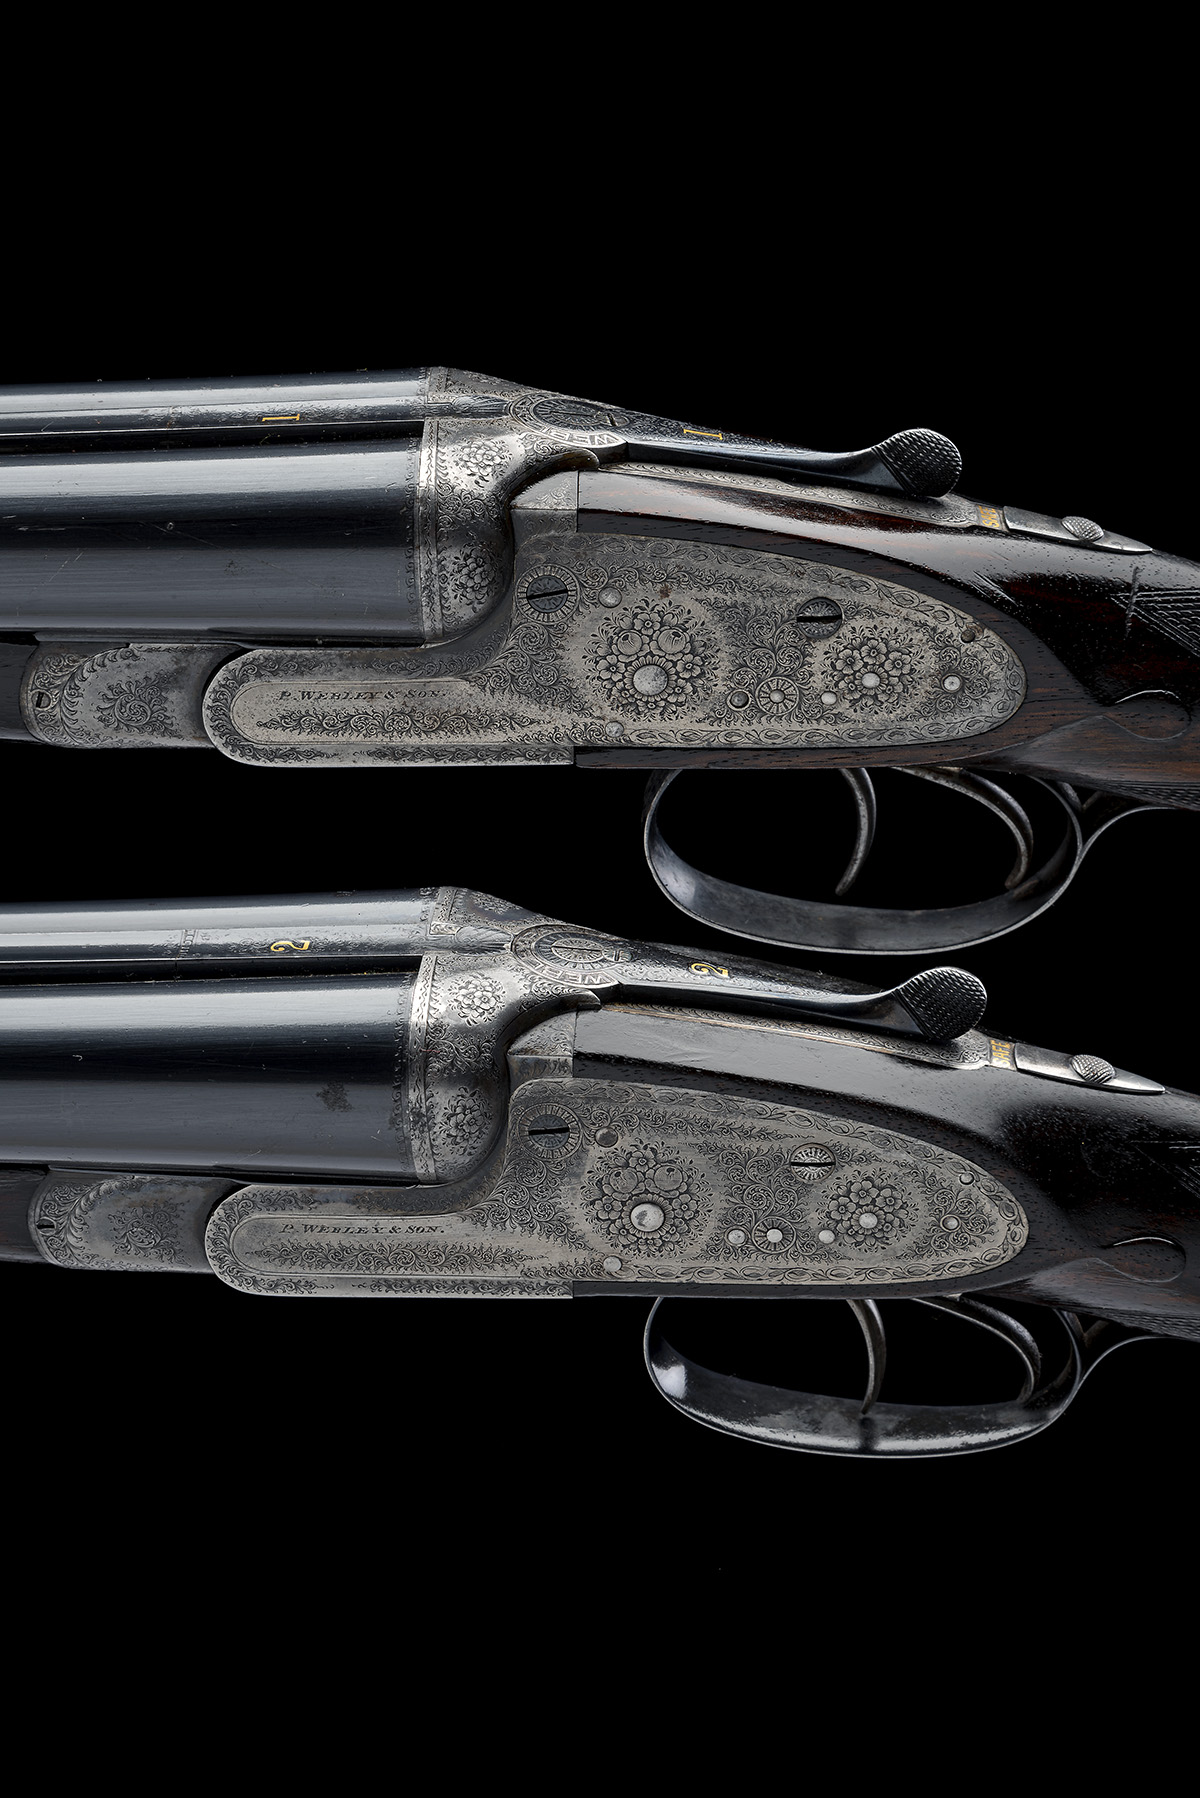 P. WEBLEY & SONS A COMPOSED PAIR OF 12-BORE SIDELOCK EJECTORS, serial no. 54657 / 54668, circa 1898, - Image 4 of 11